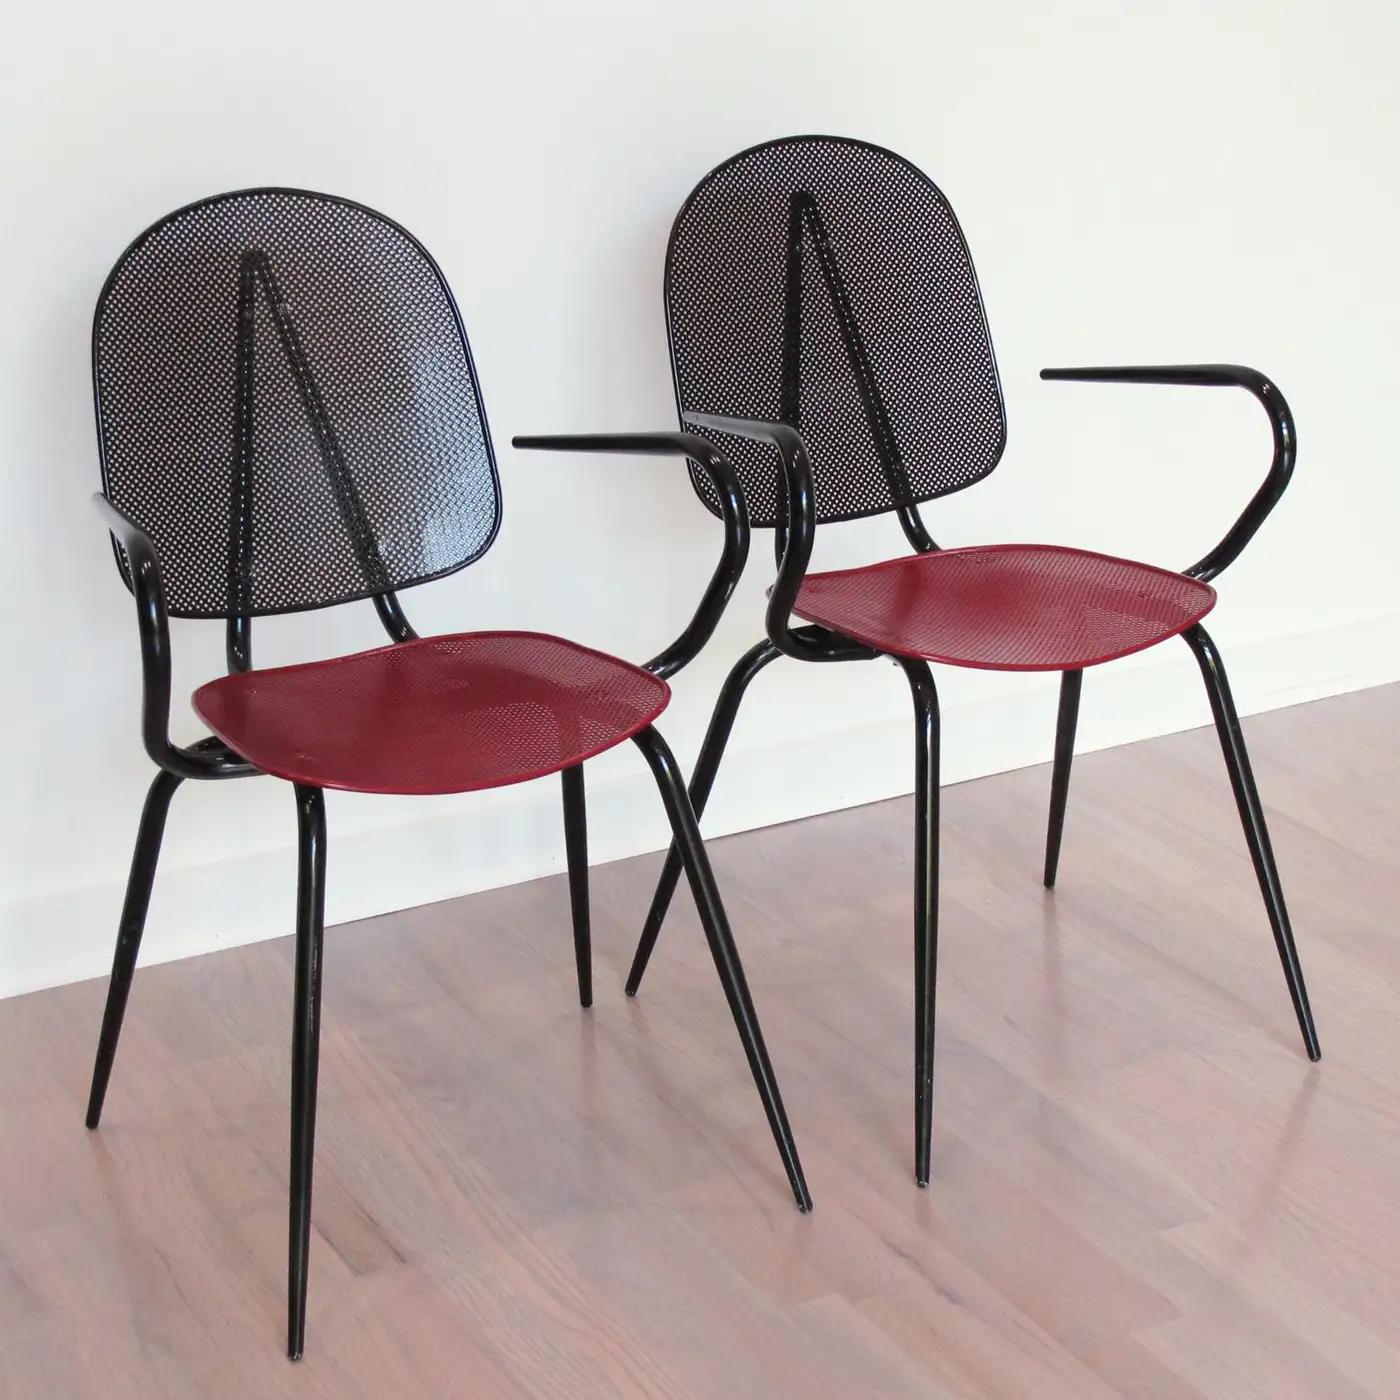 These stunning metal chairs or armchairs have a design reminiscent of Mathieu Mategot's work. They feature a striking example of French 1950s metalwork, with folded and perforated black and red lacquered metal. This superb modernist shape is very